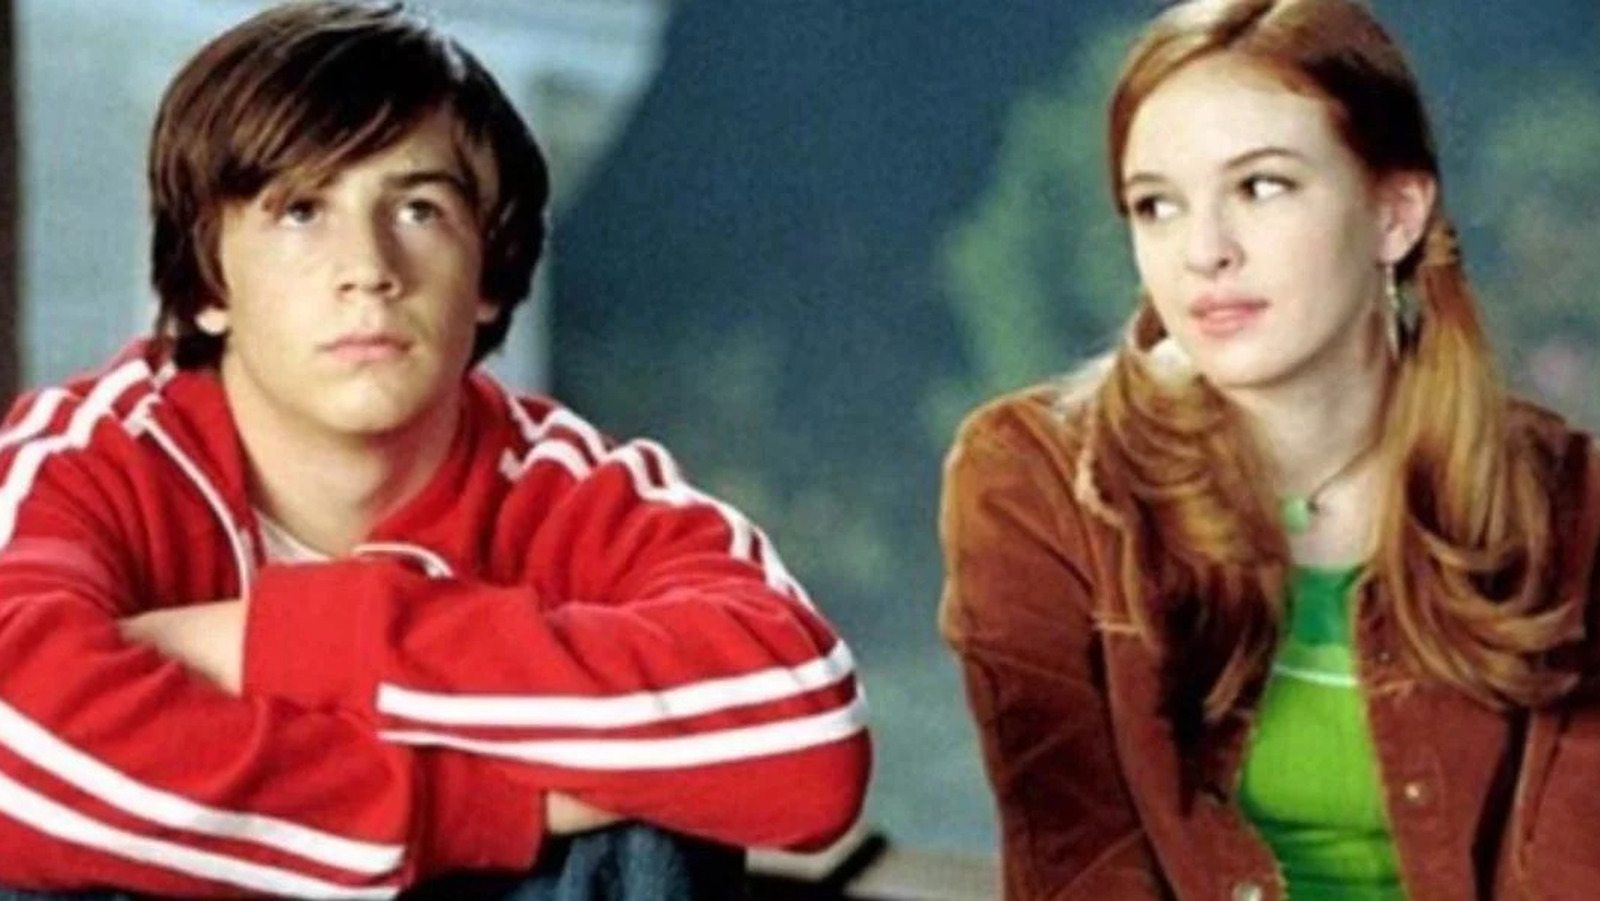 Whatever Happened To The Sky High Cast?